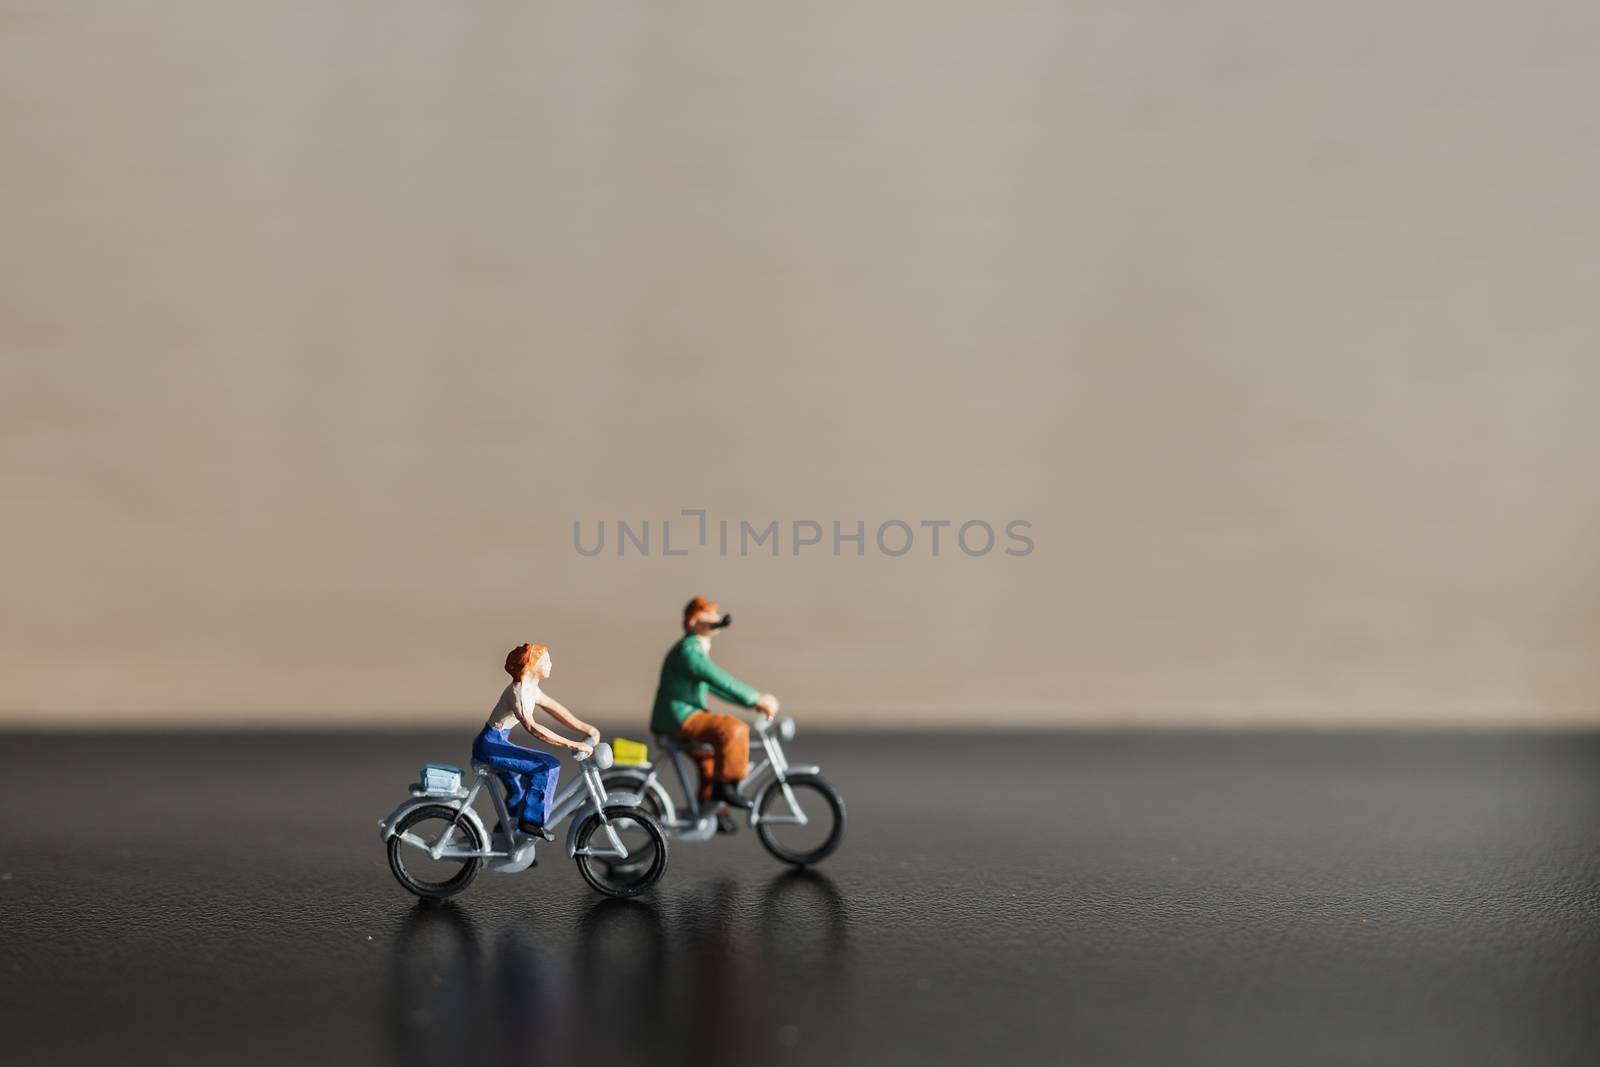 Miniature people : Travelers riding bicycle , Healthy lifestyle concept